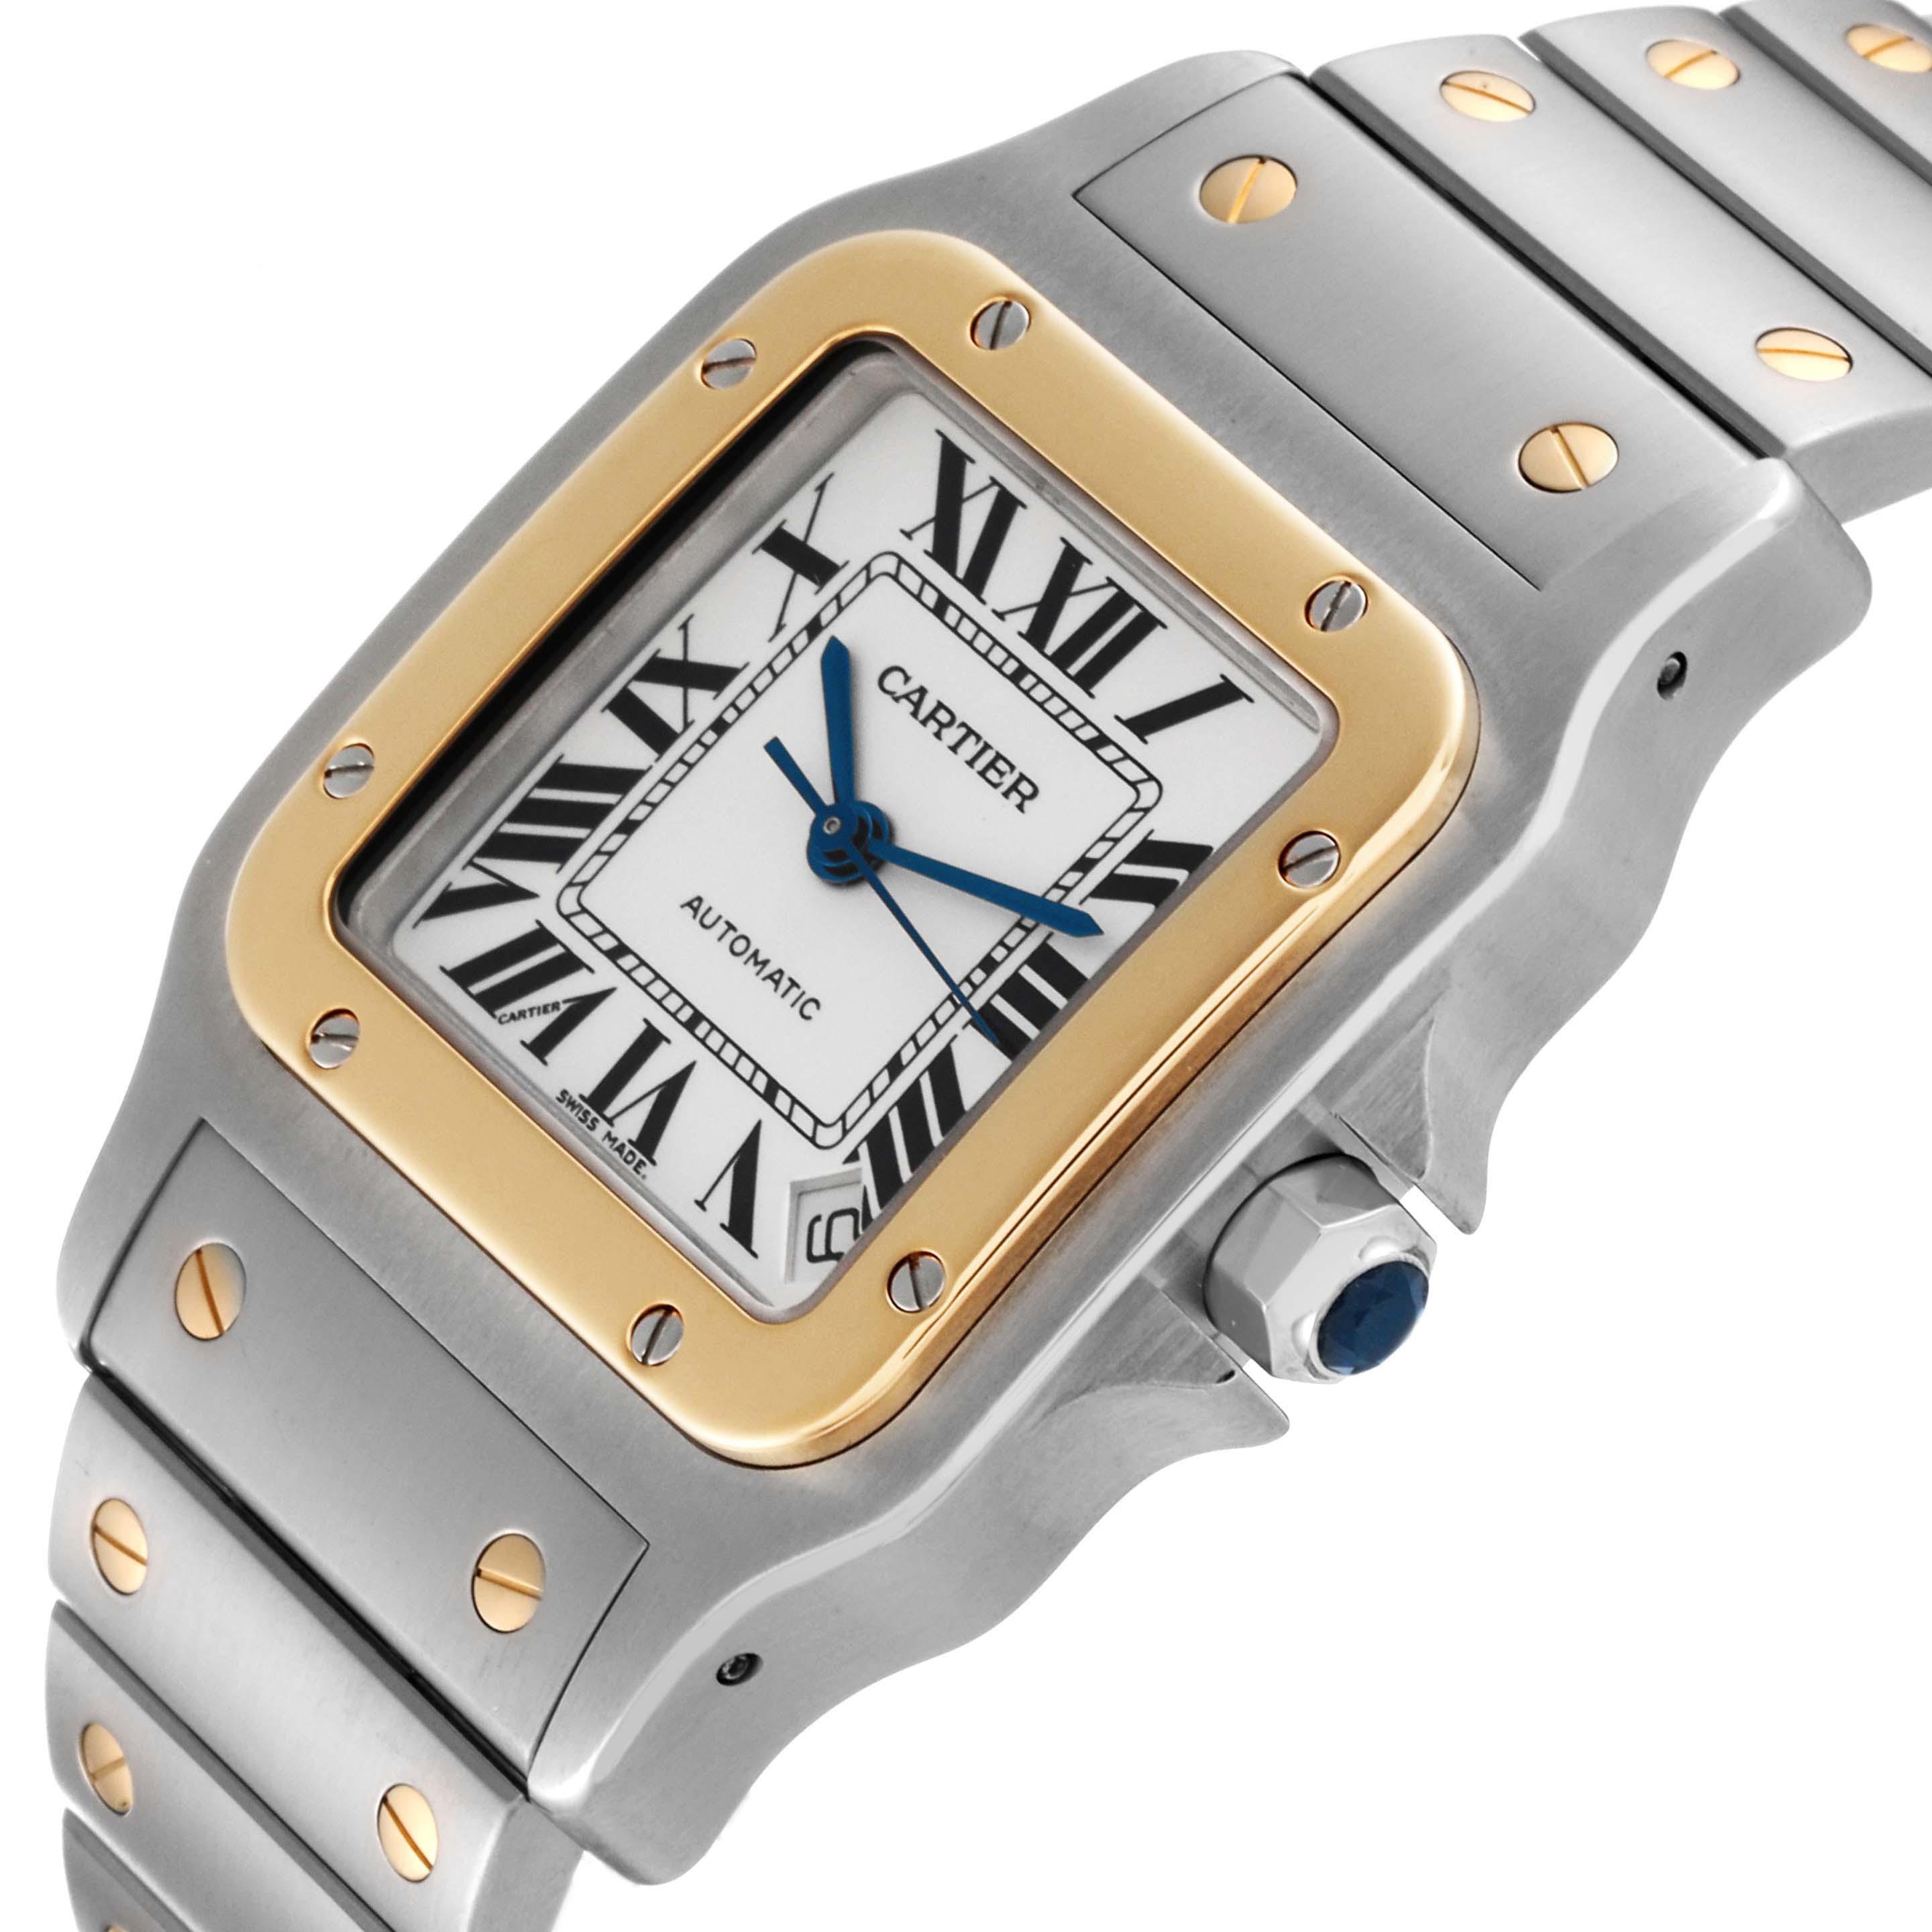 Cartier Santos Galbee XL Steel Yellow Gold Mens Watch W20099C4 Box Papers. Automatic self-winding movement, Caliber 049. Brushed and polished stainless steel case 32 X 45 mm. Stainless steel protected octagonal crown set with a faceted blue spinel